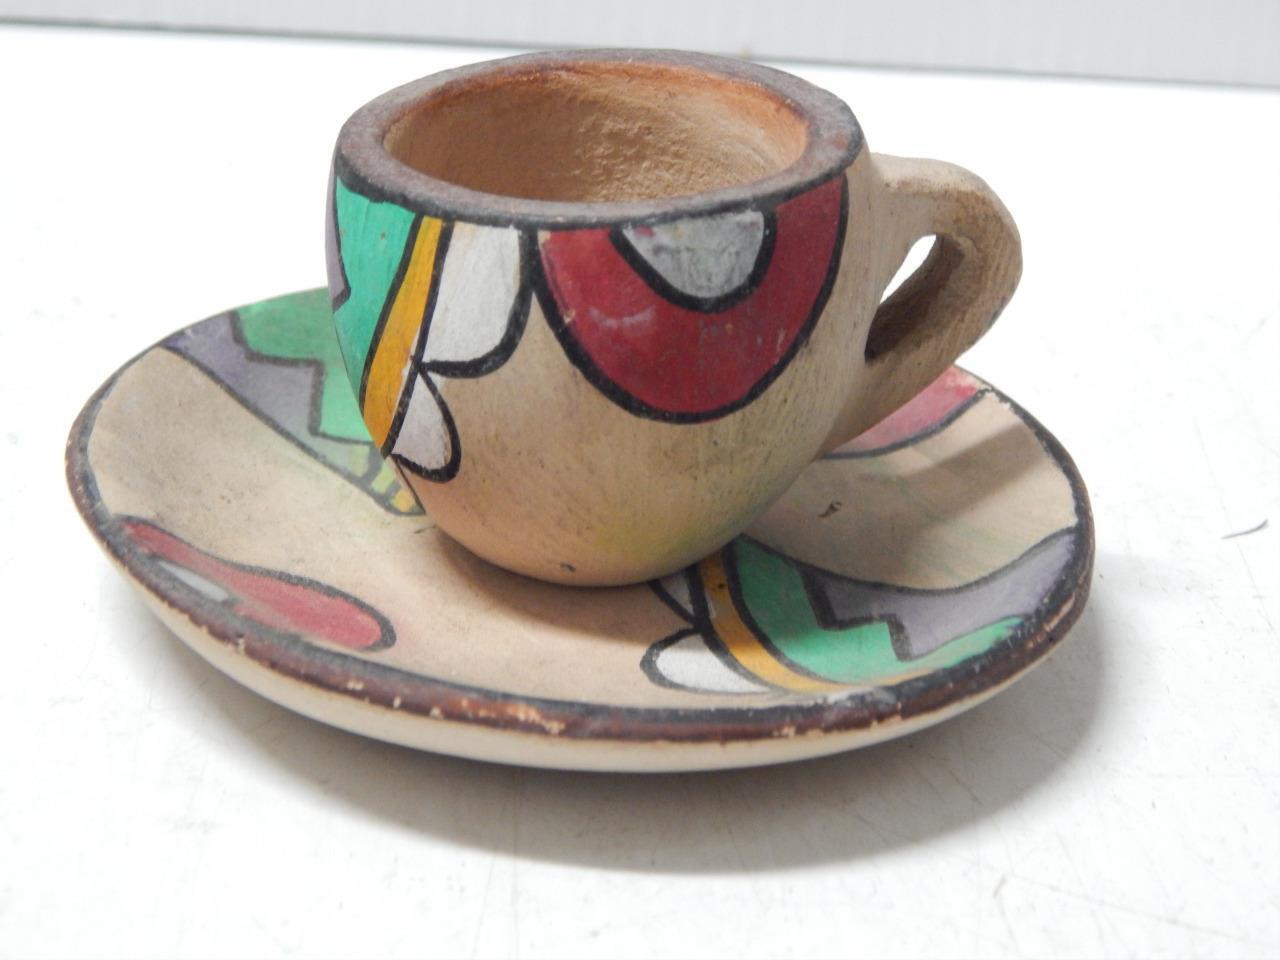 VINTAGE TESUQUE POTTERY MINIATURE CUP AND SAUCER - c.1950s